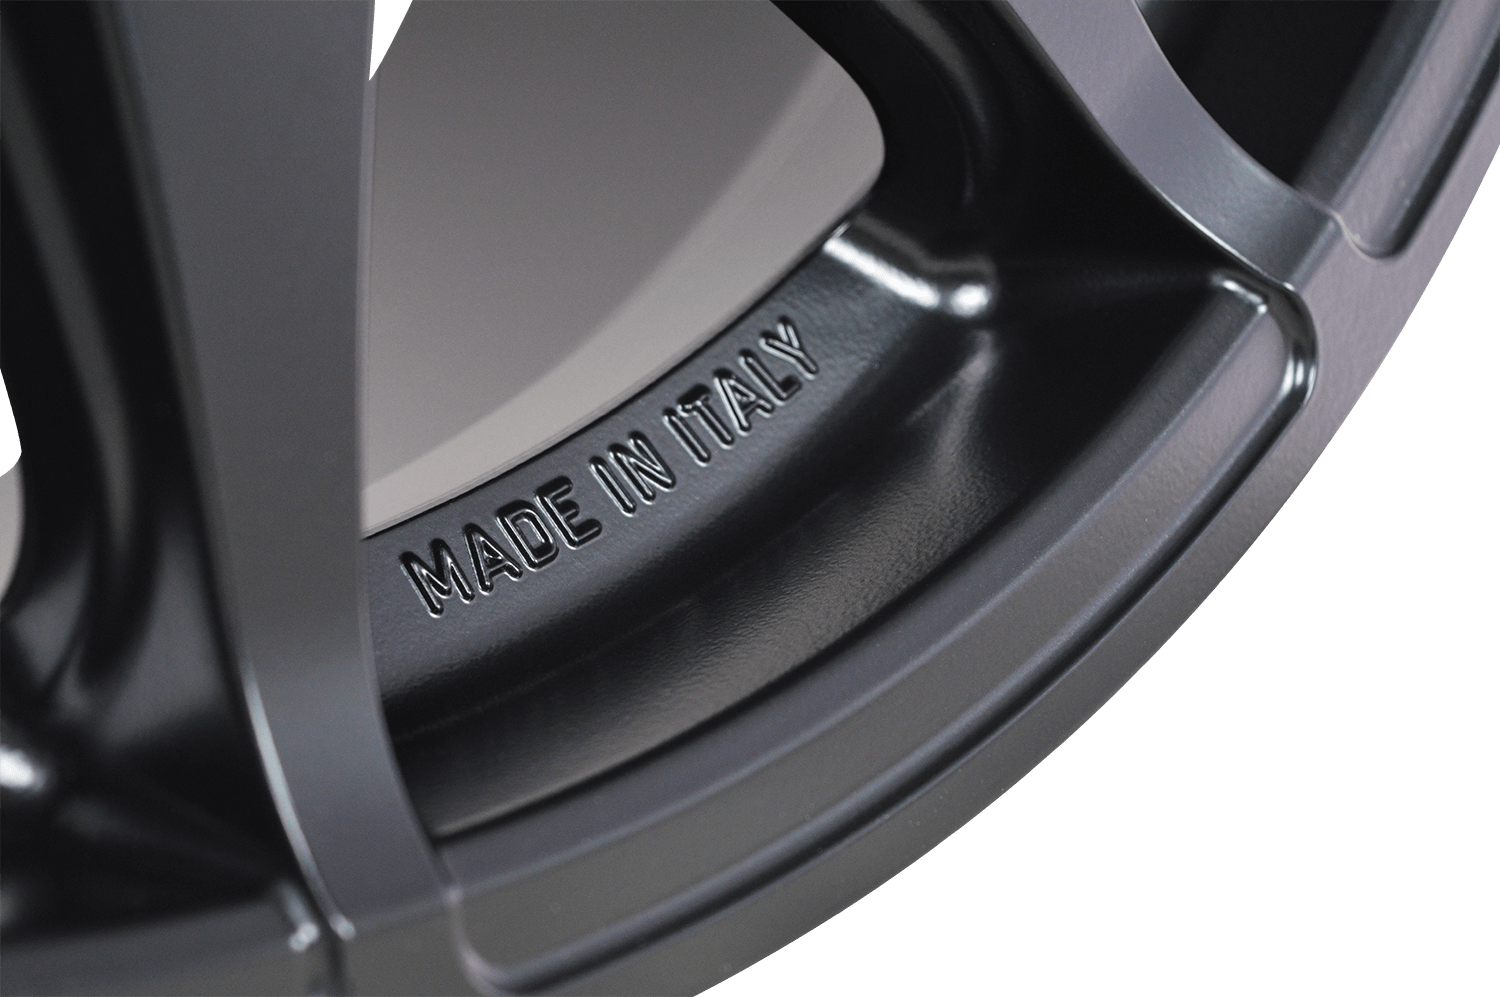 Evo Corse dakar wheel close view mat black, for toyota land cruiser 300 series. the 4x4 off road light alloy wheel with the highest high load rating for overlanding, rally, 4wd expedition and off road use in australia